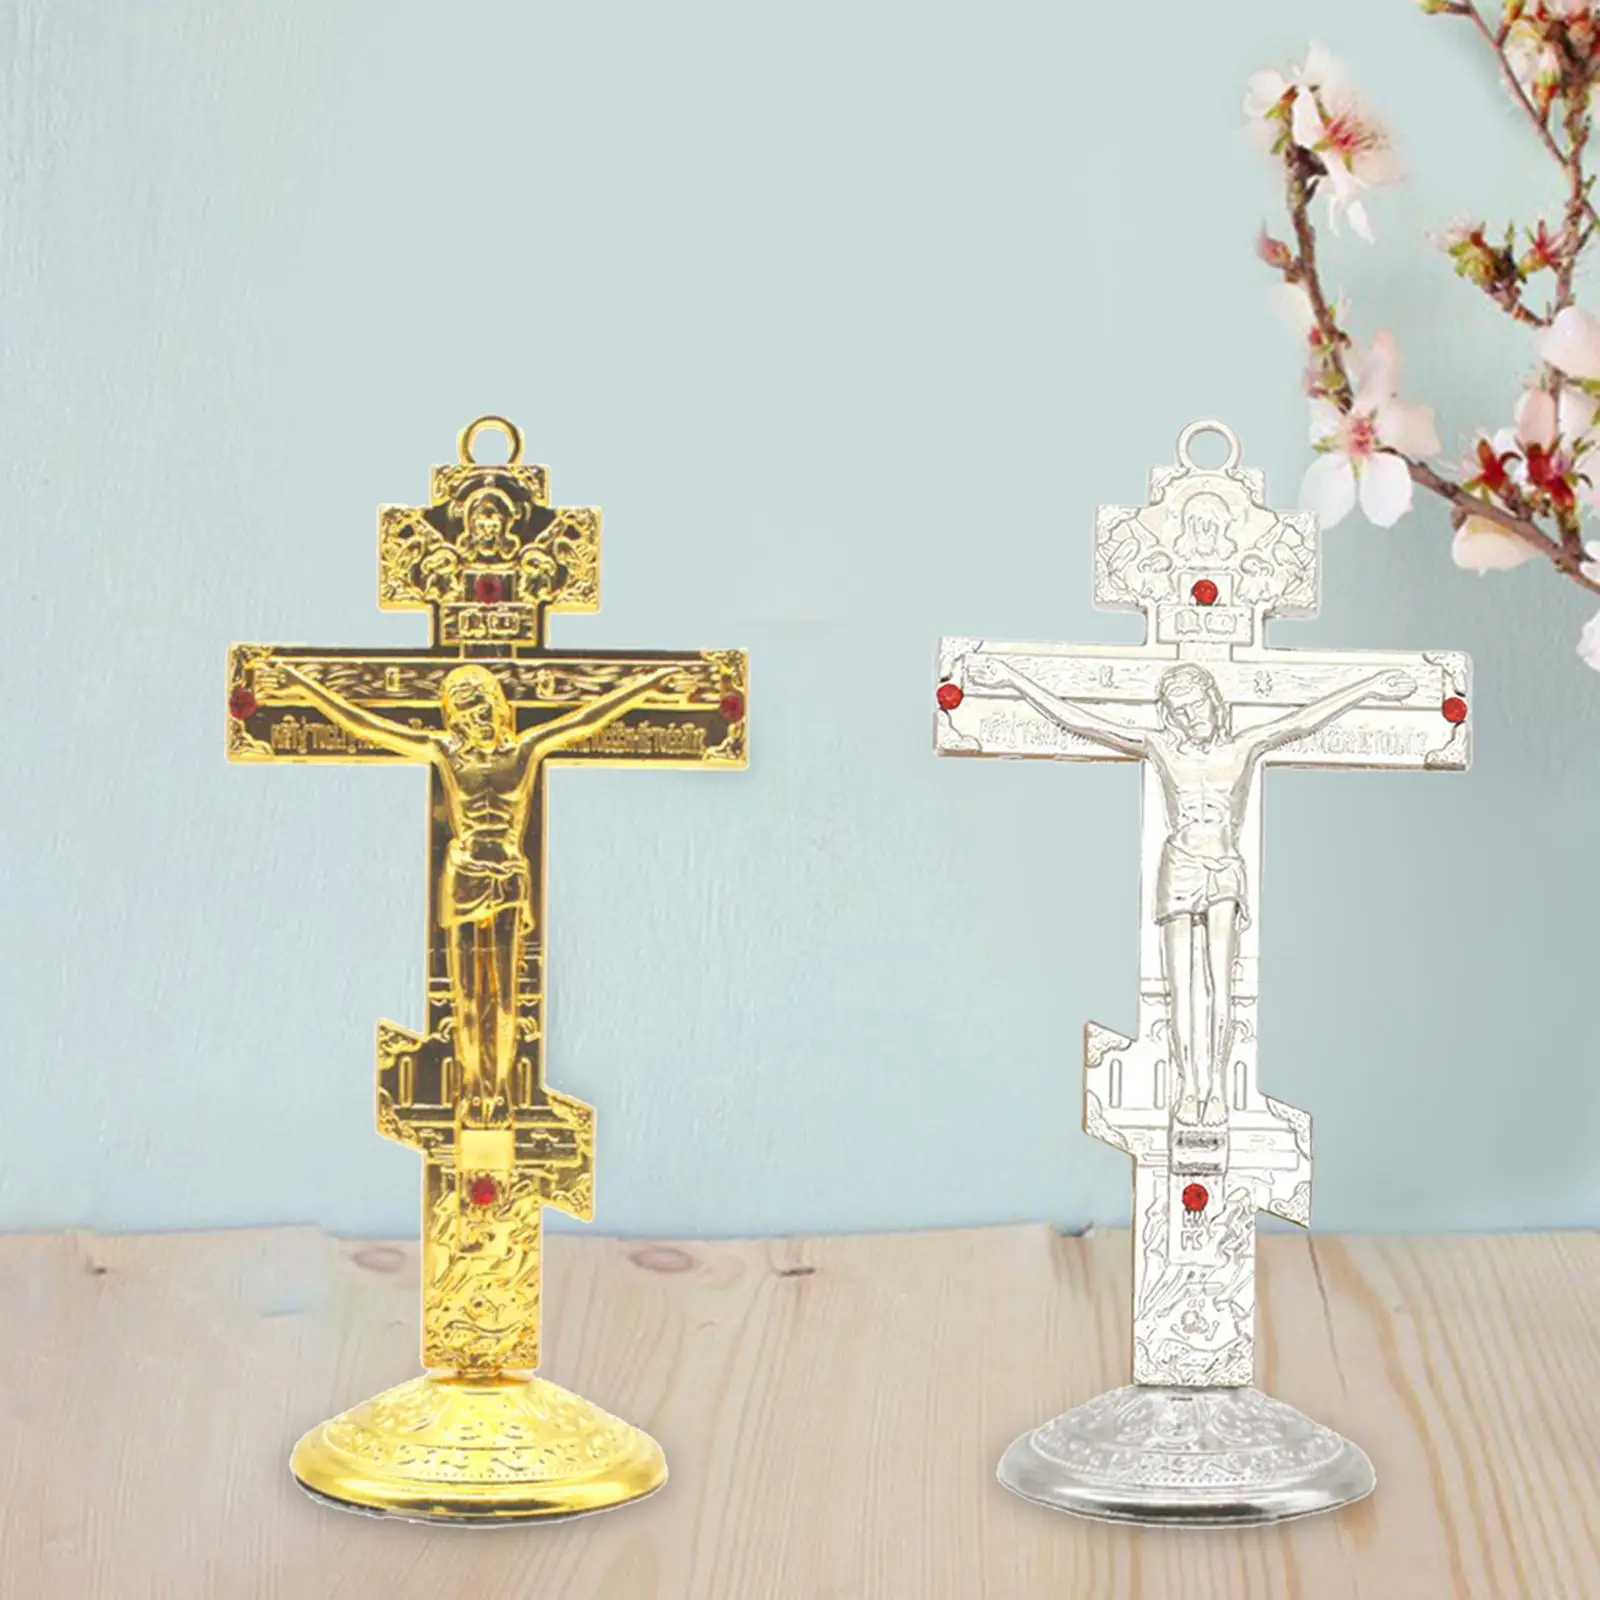 Jesus Cross for Desk Metal Durable Easy to Install Standing Crucifix Home Chapel Decoration 6.7x14cm Prayer Utensils Home Decor